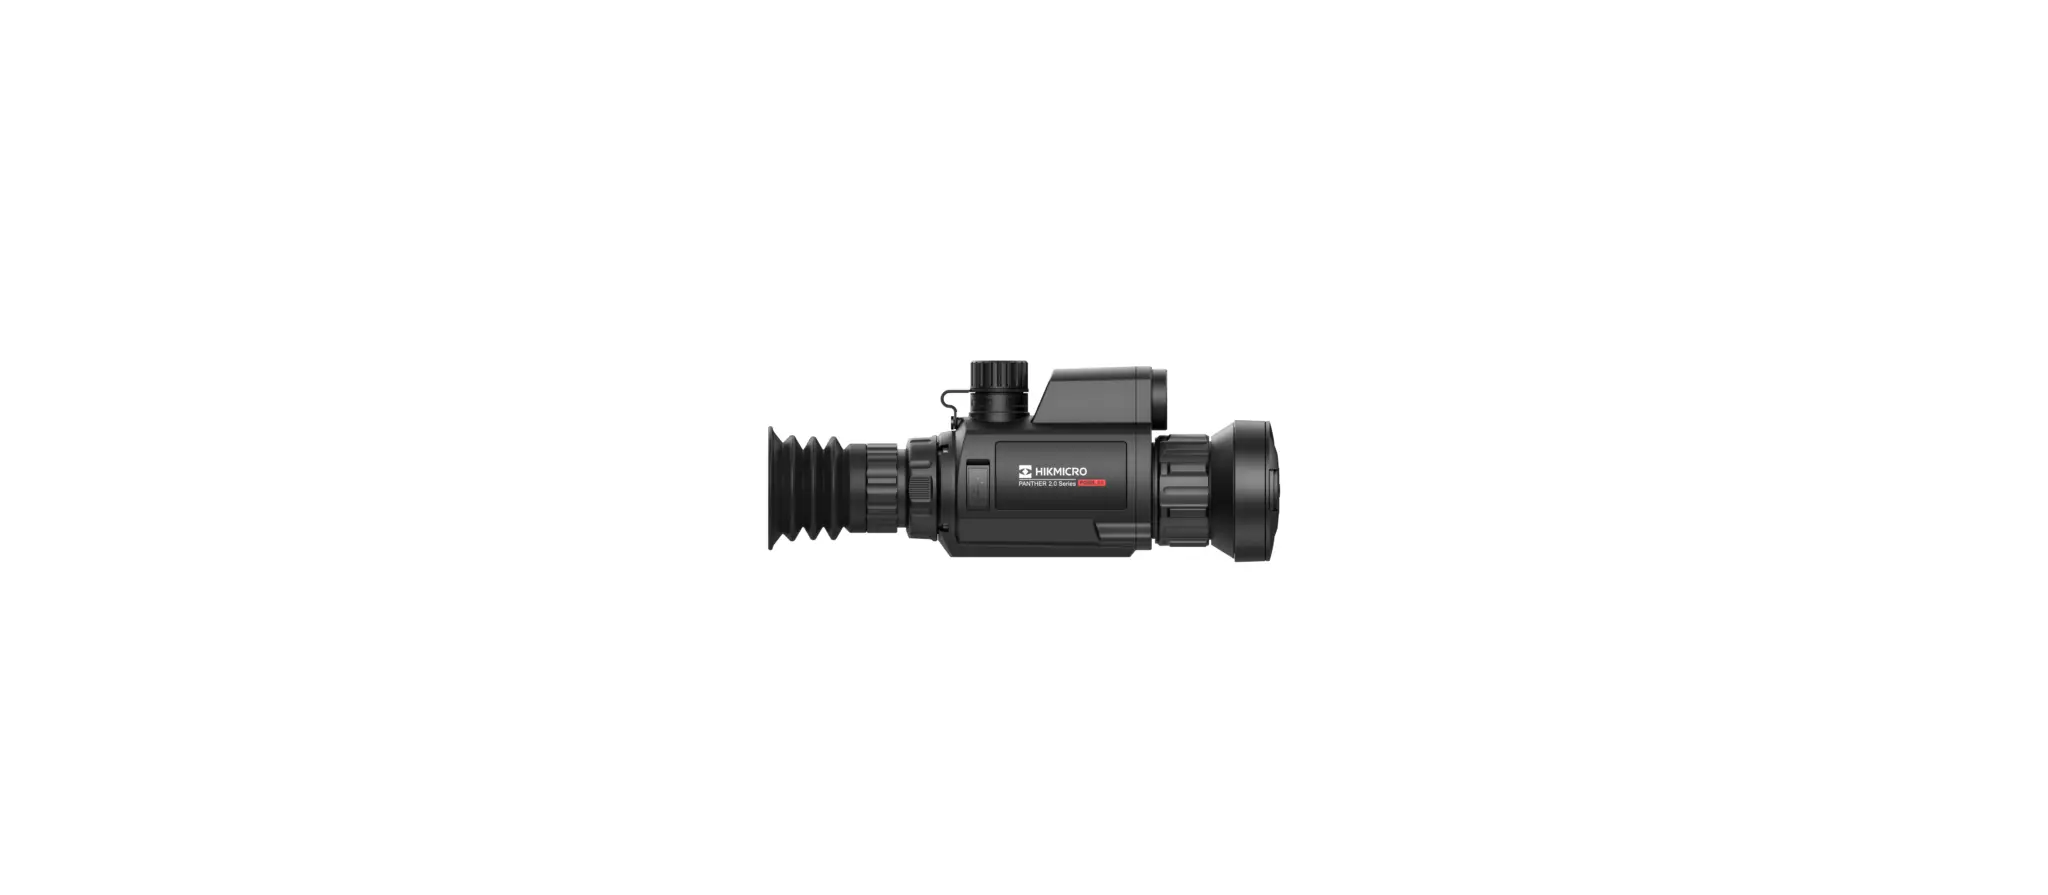 PANTHER 2.0 Series Thermal Image Scope